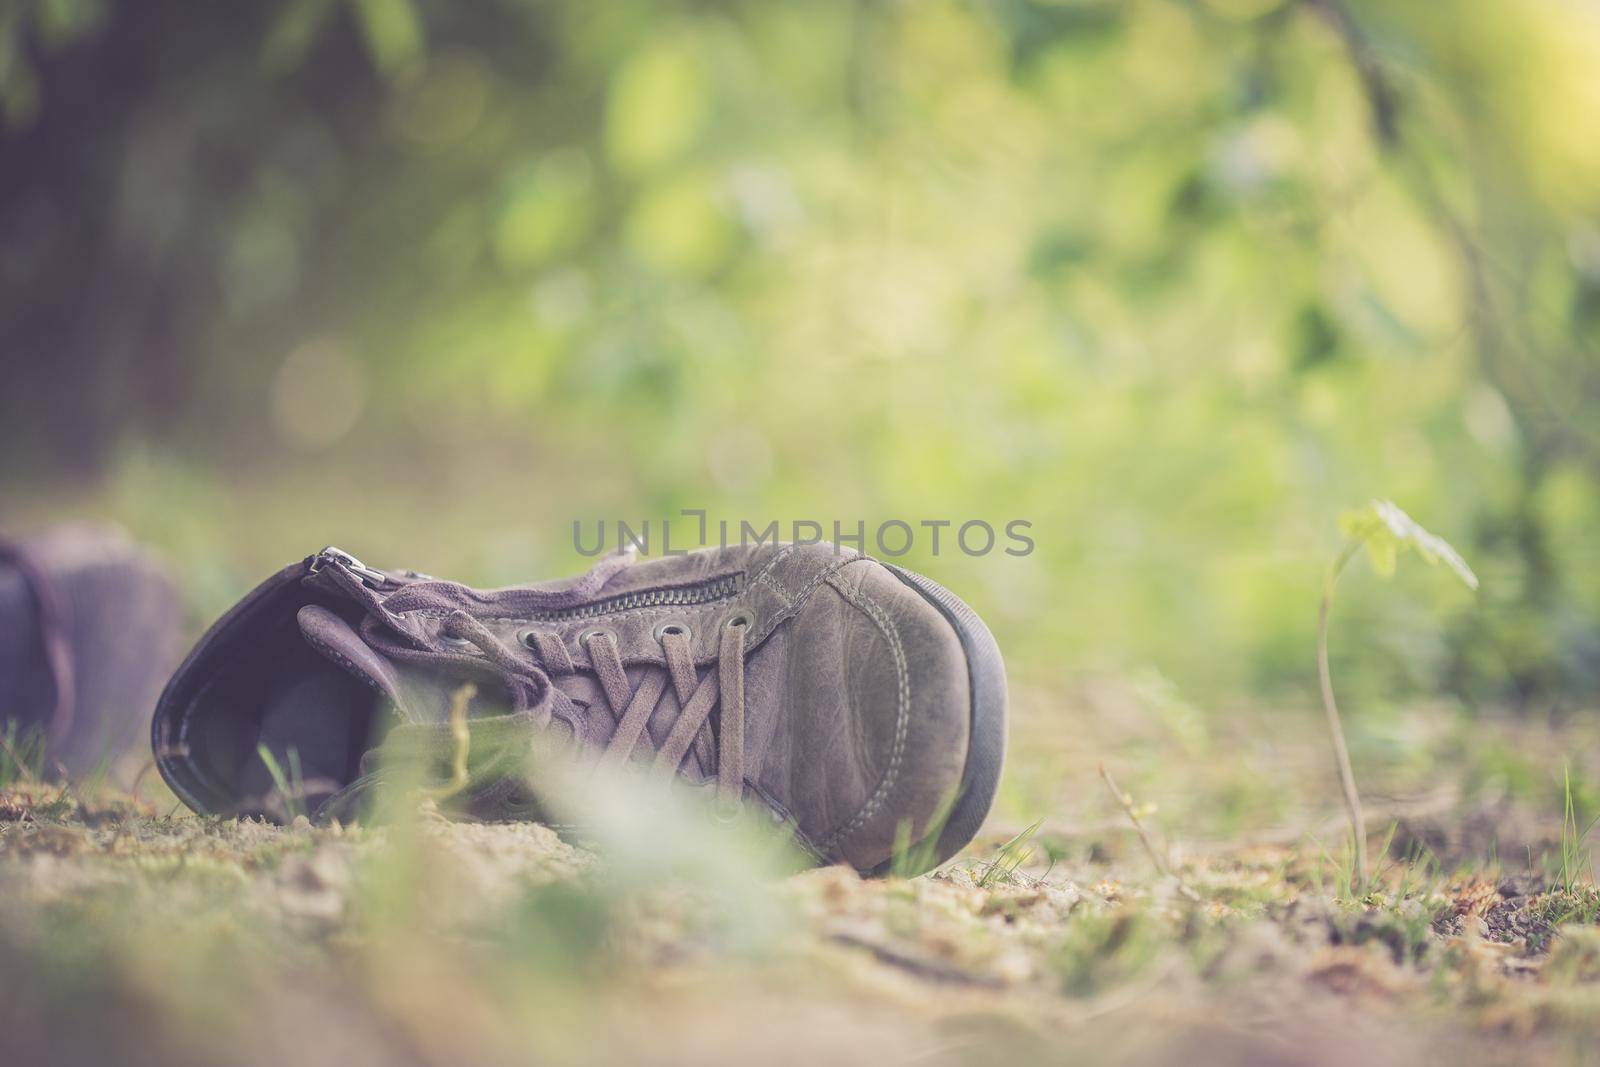 Missing and poverty concept: Abandoned shoe lying on the dusty ground by Daxenbichler